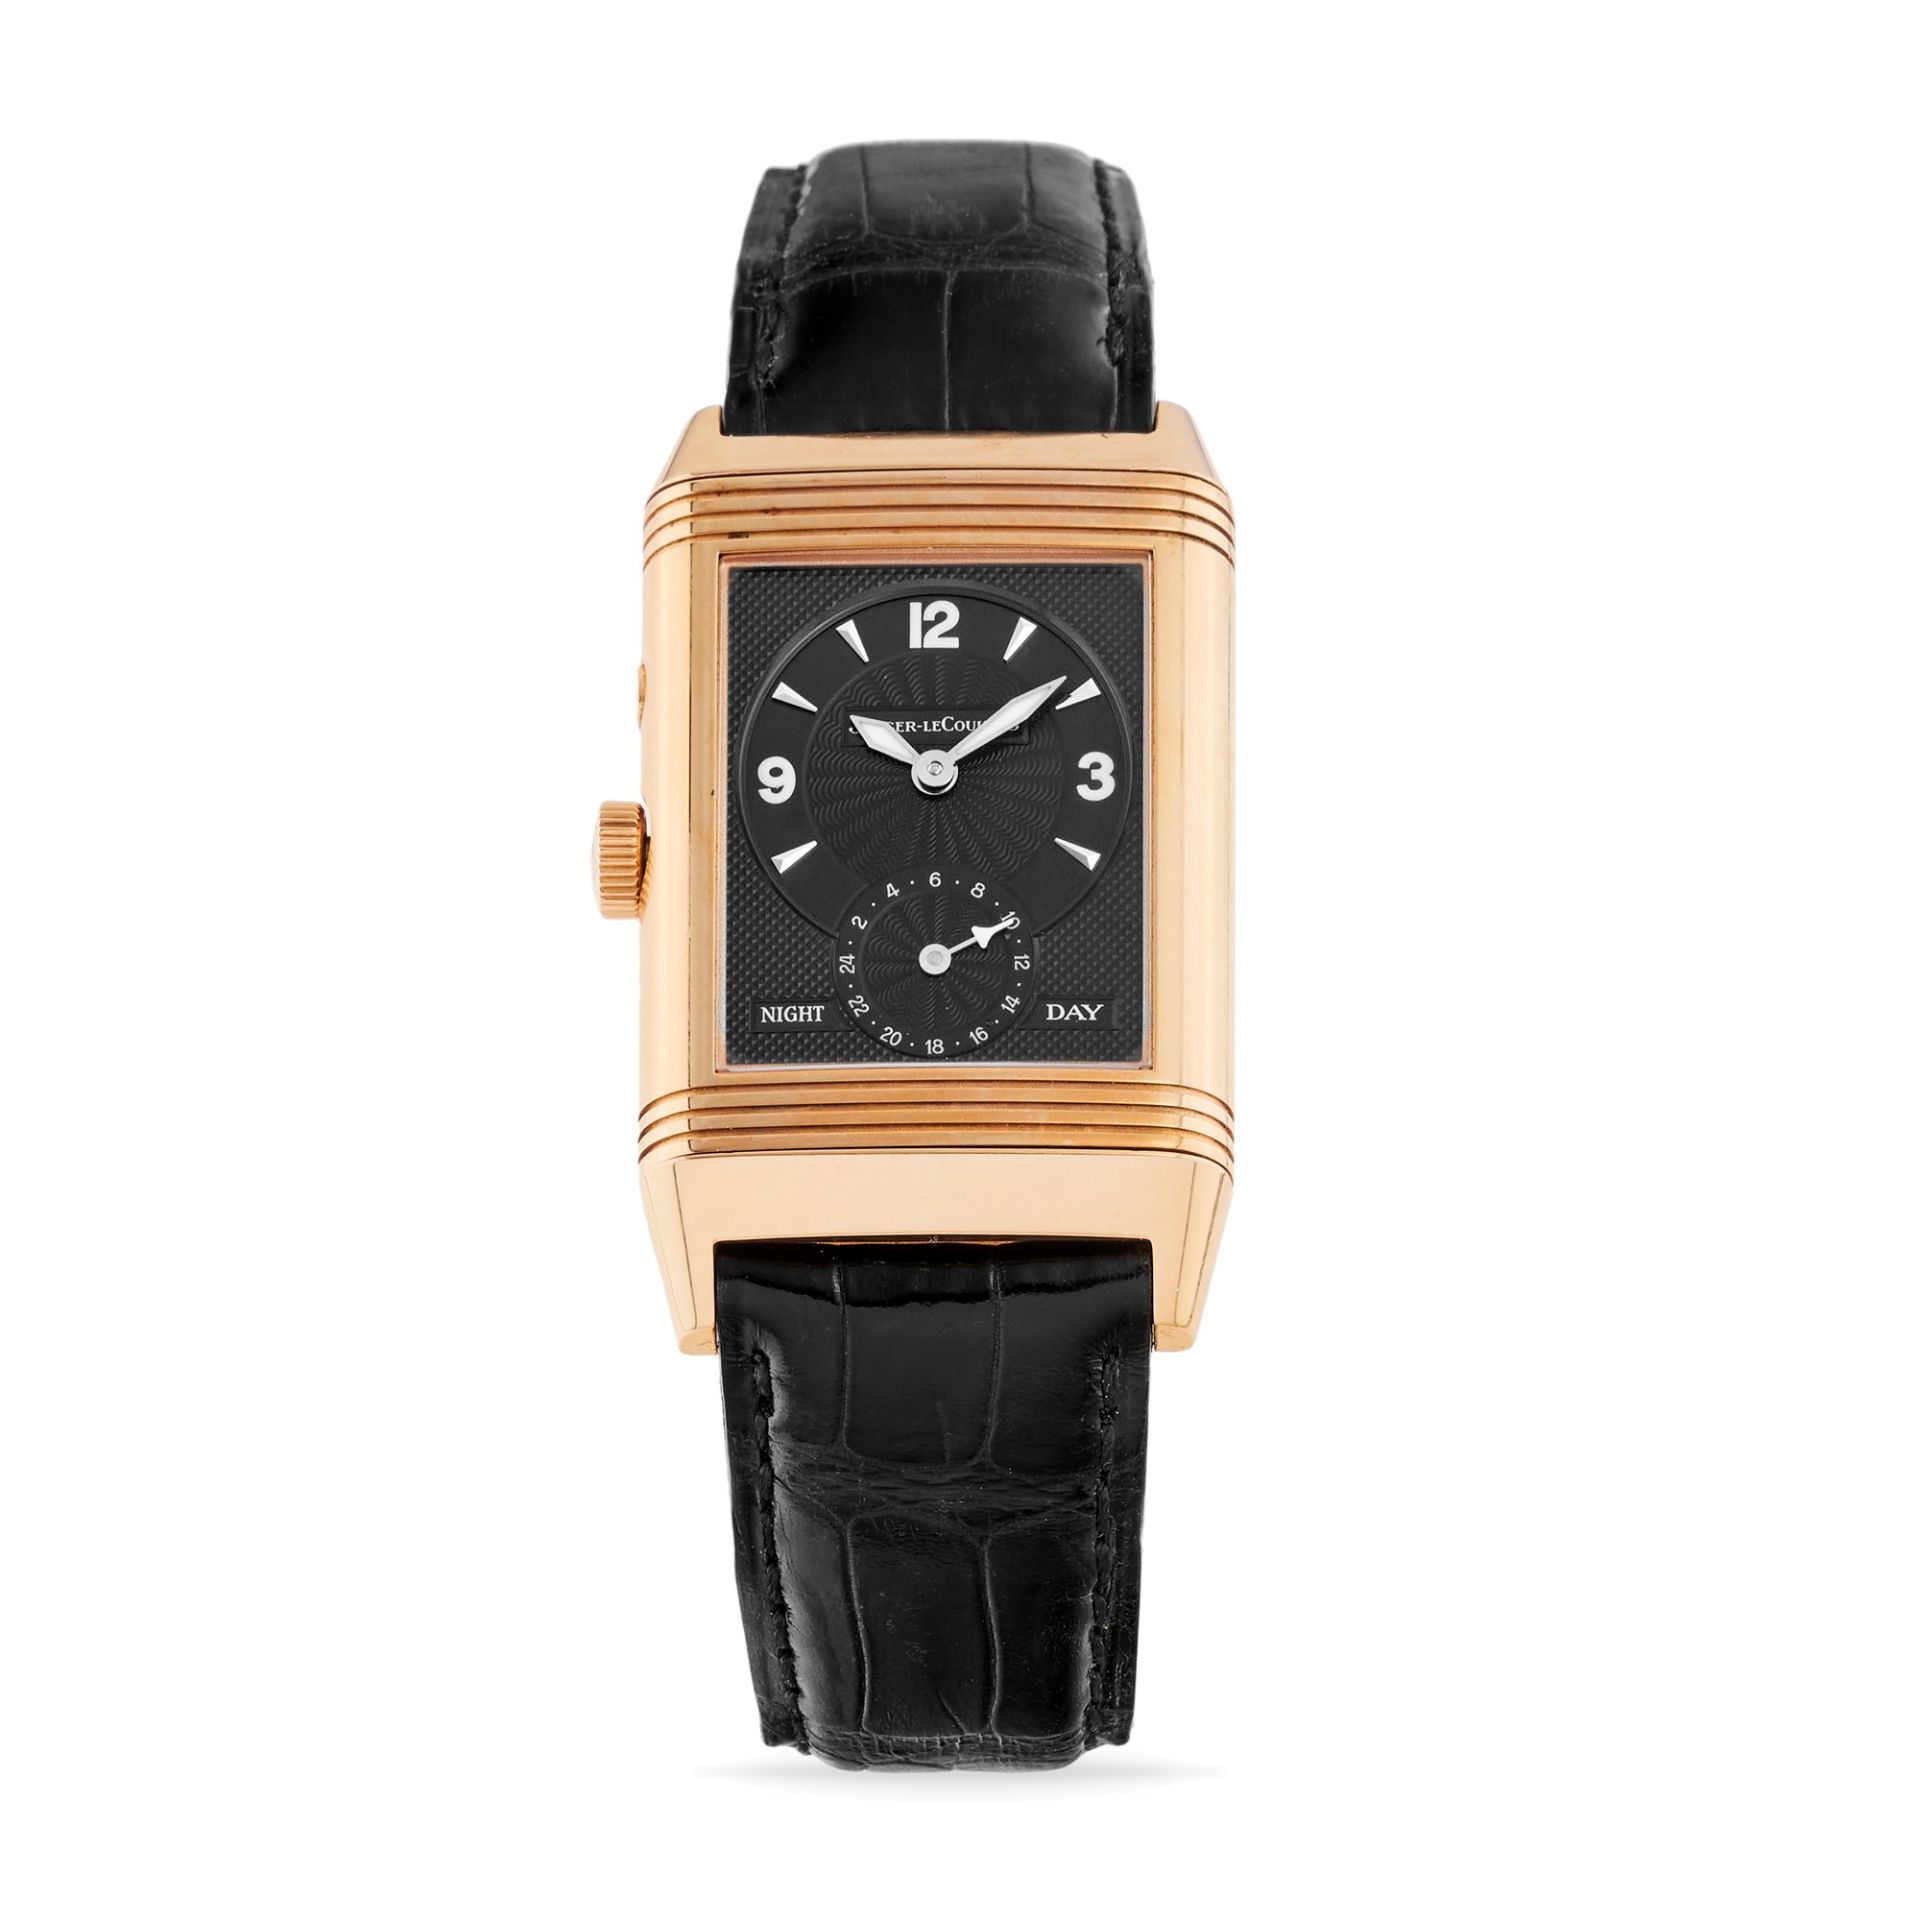 Jaeger-LeCoultre Reverso Duoface Night & Day 270254, ‘90s